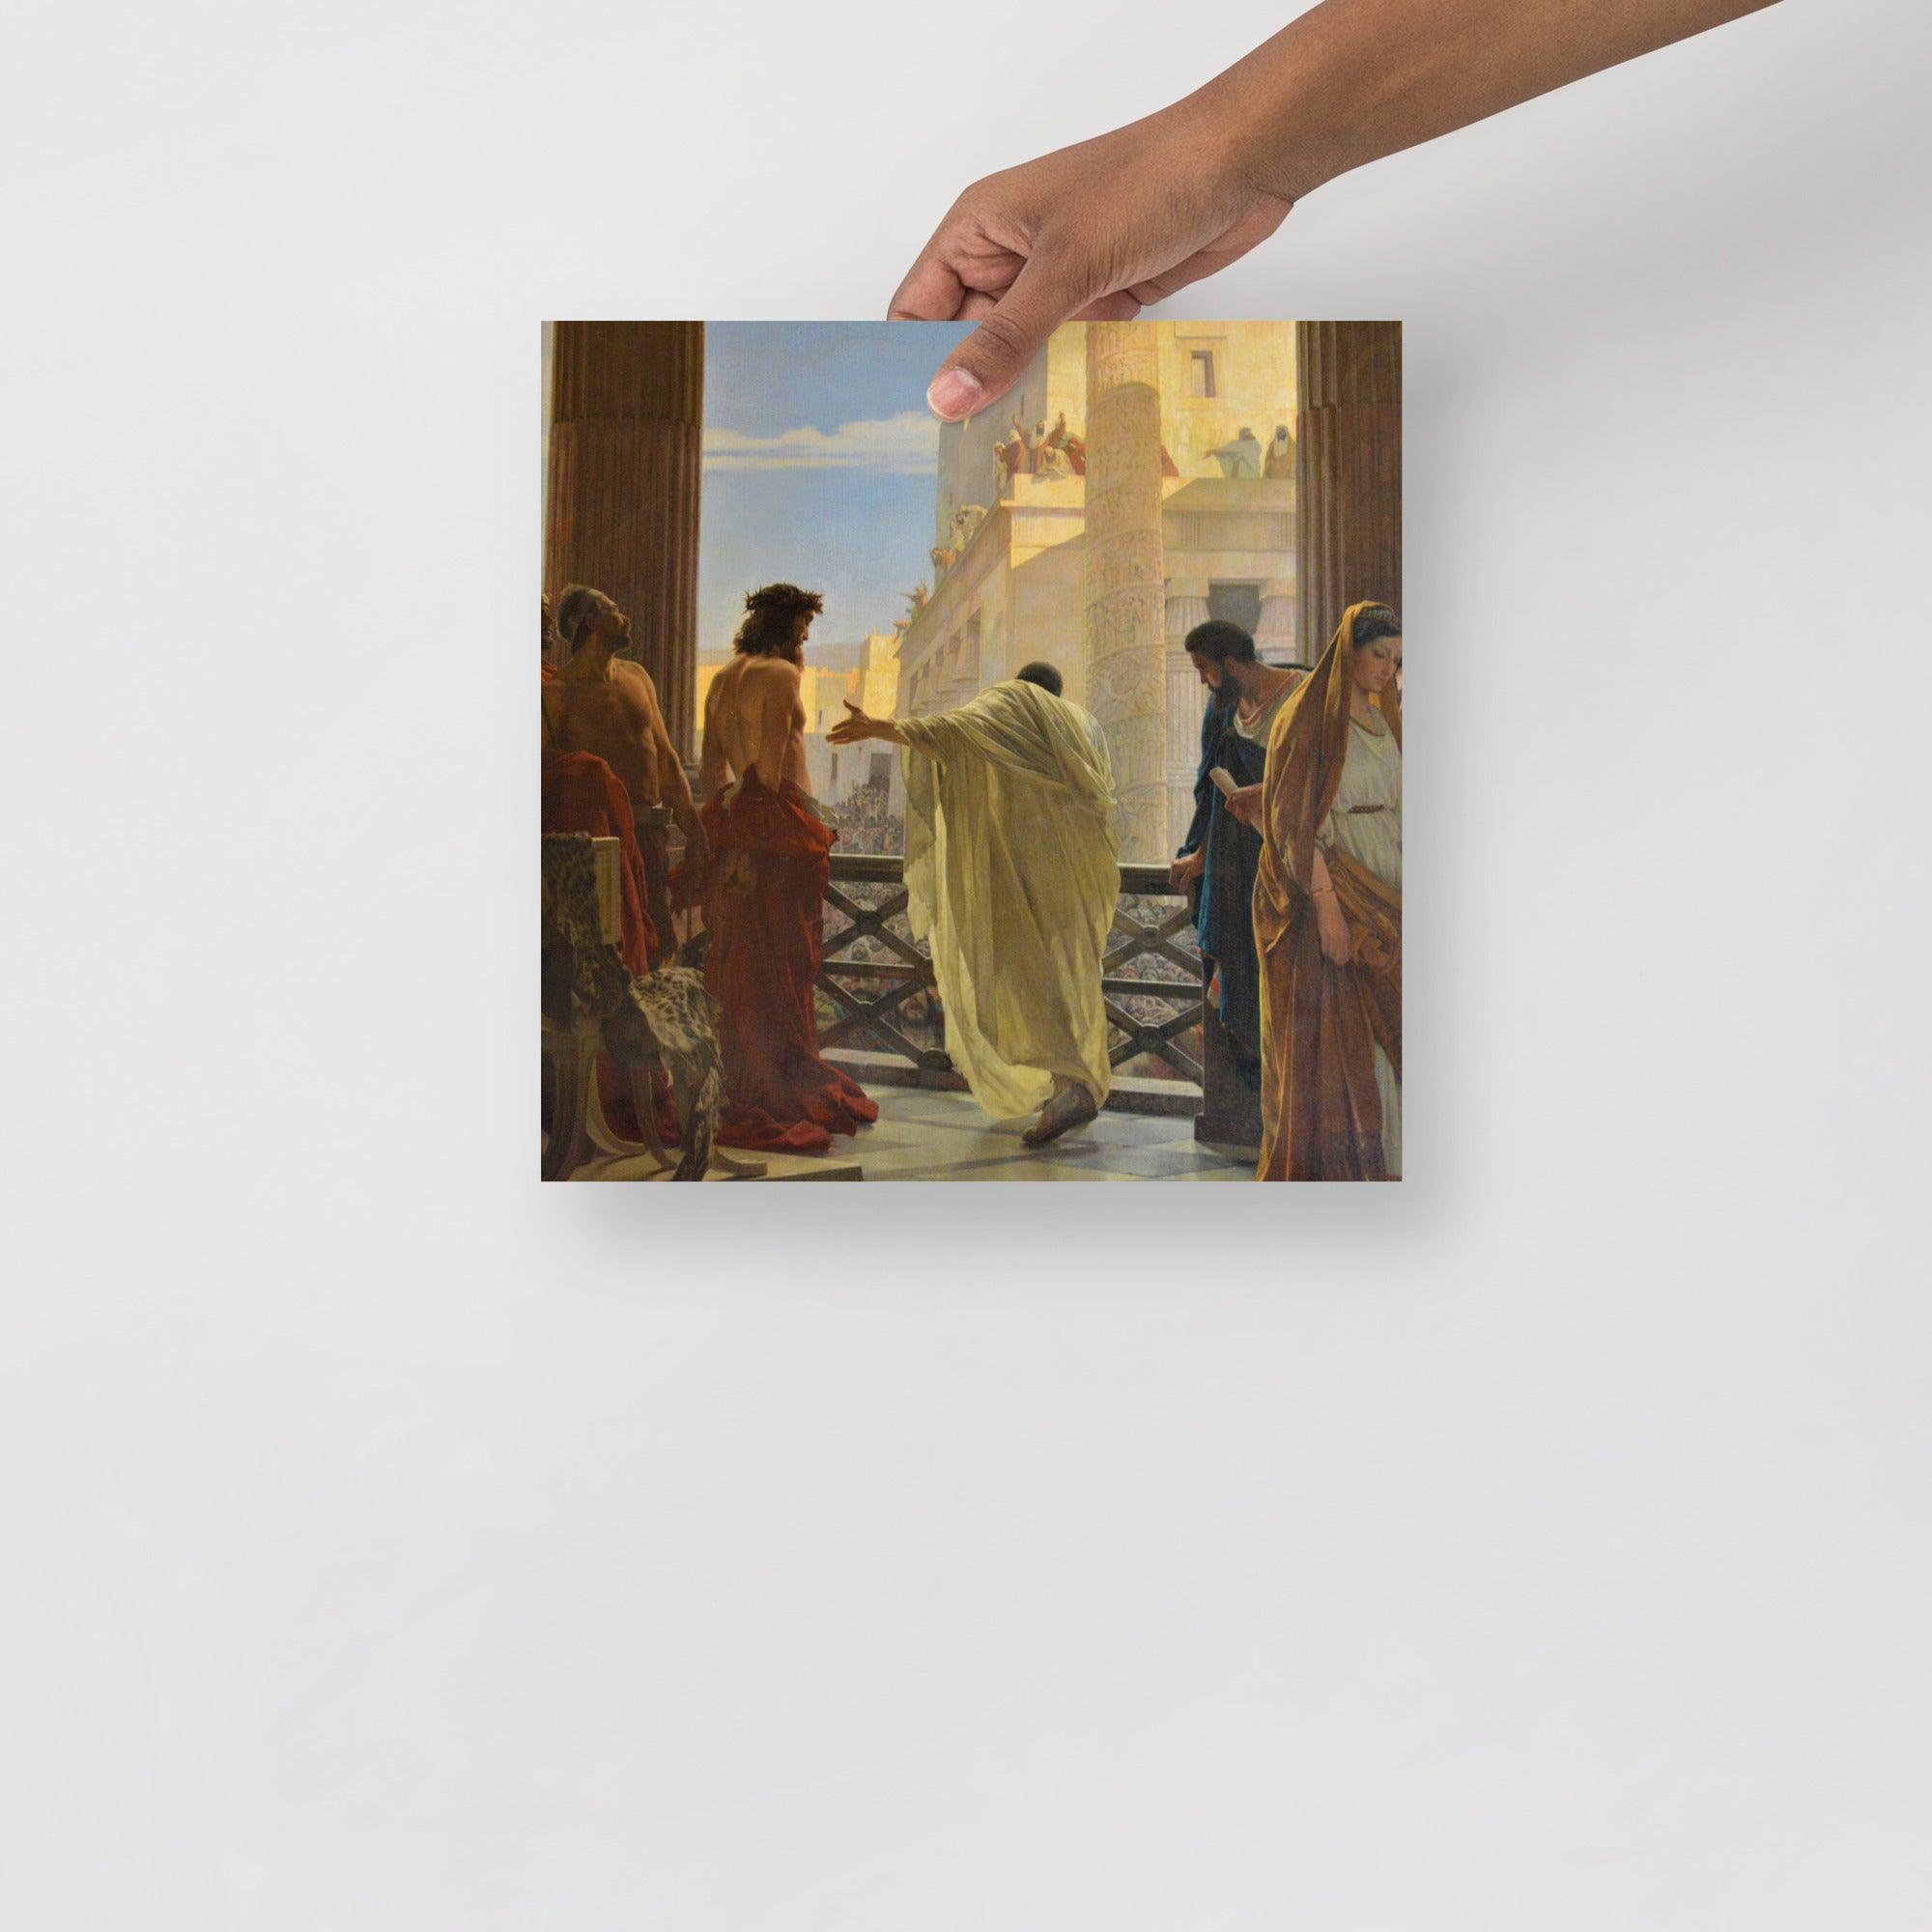 An Ecce Homo poster on a plain backdrop in size 12x12”.